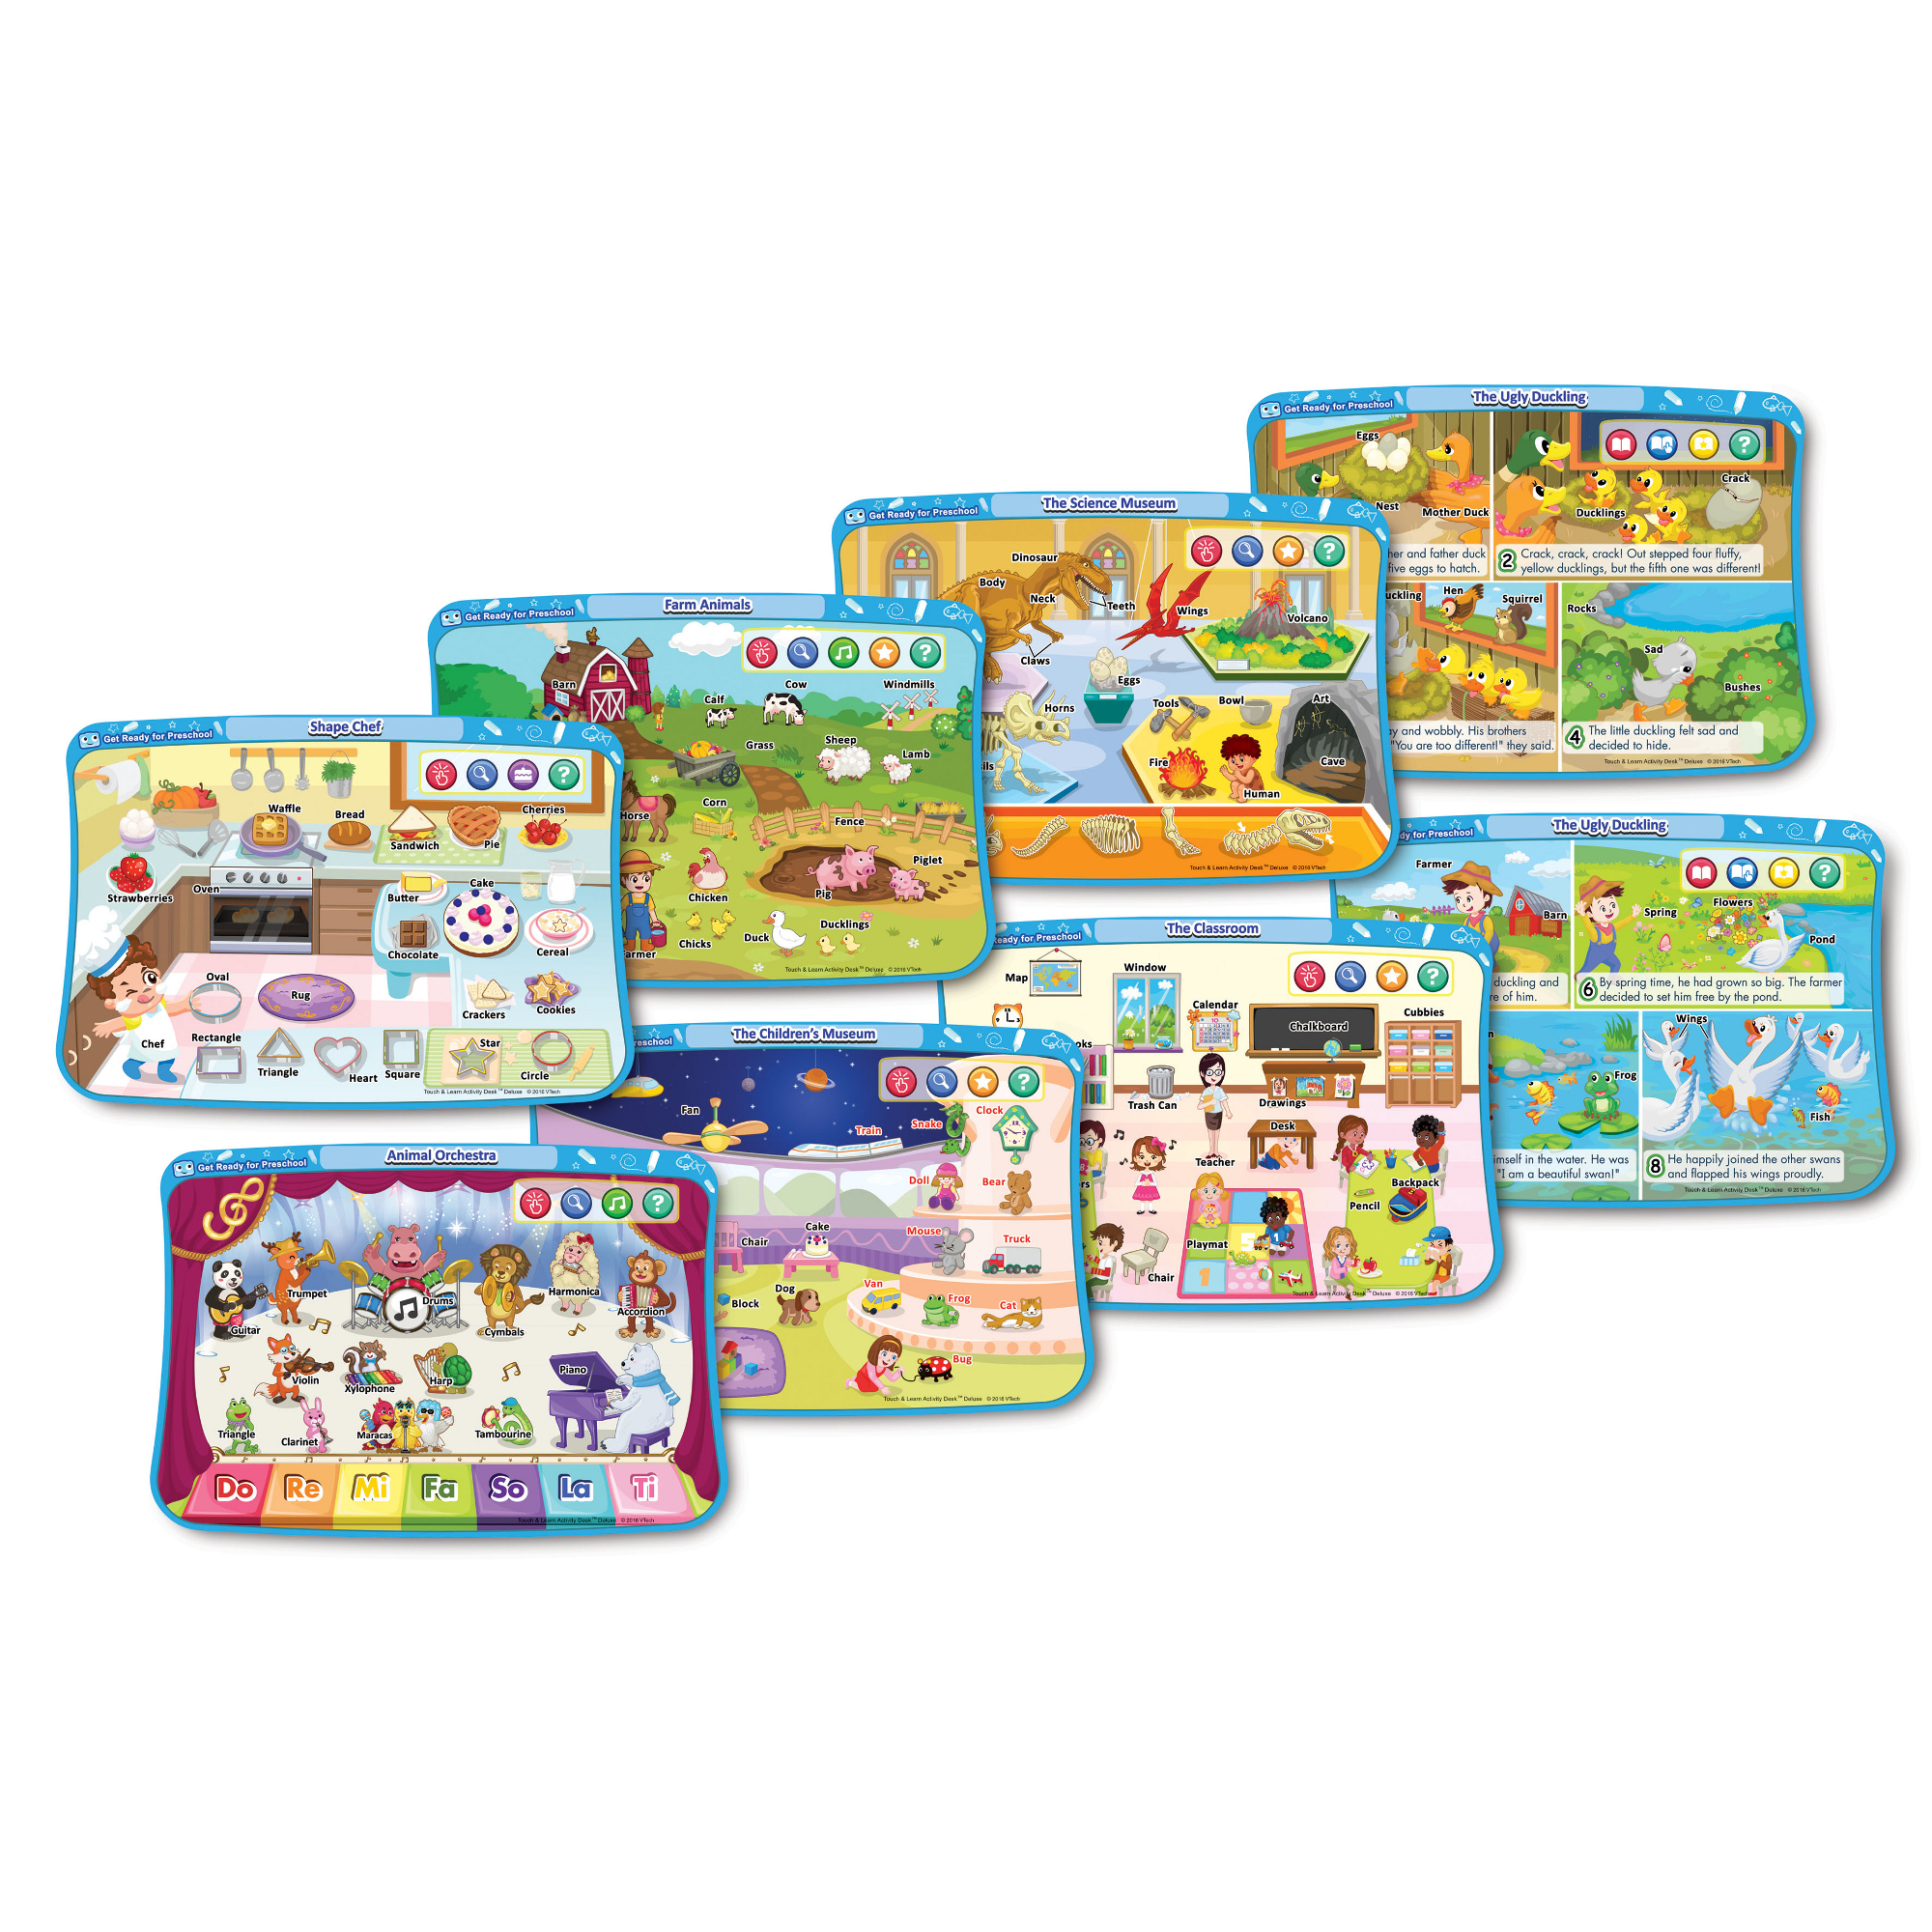 VTech Touch & Learn Activity Desk Deluxe Expansion Pack